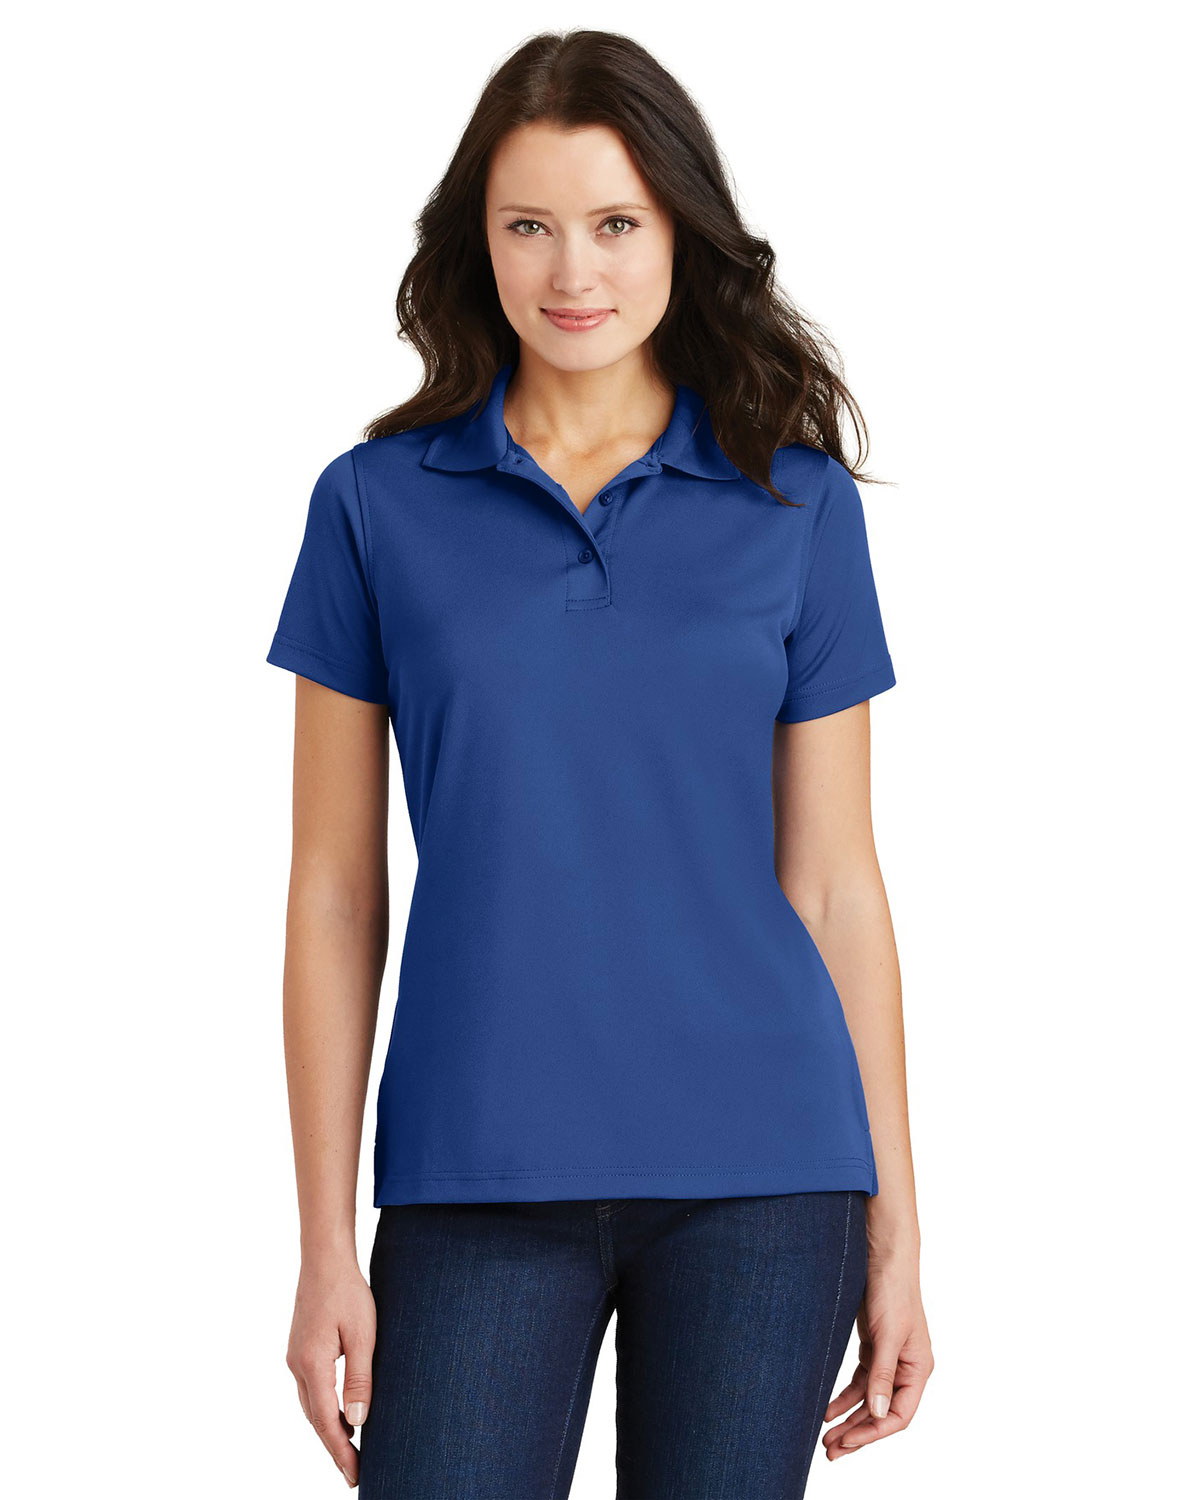 Port Authority L497 Women Poly Bamboo Charcoal Blend Pique Polo at Apparelstation